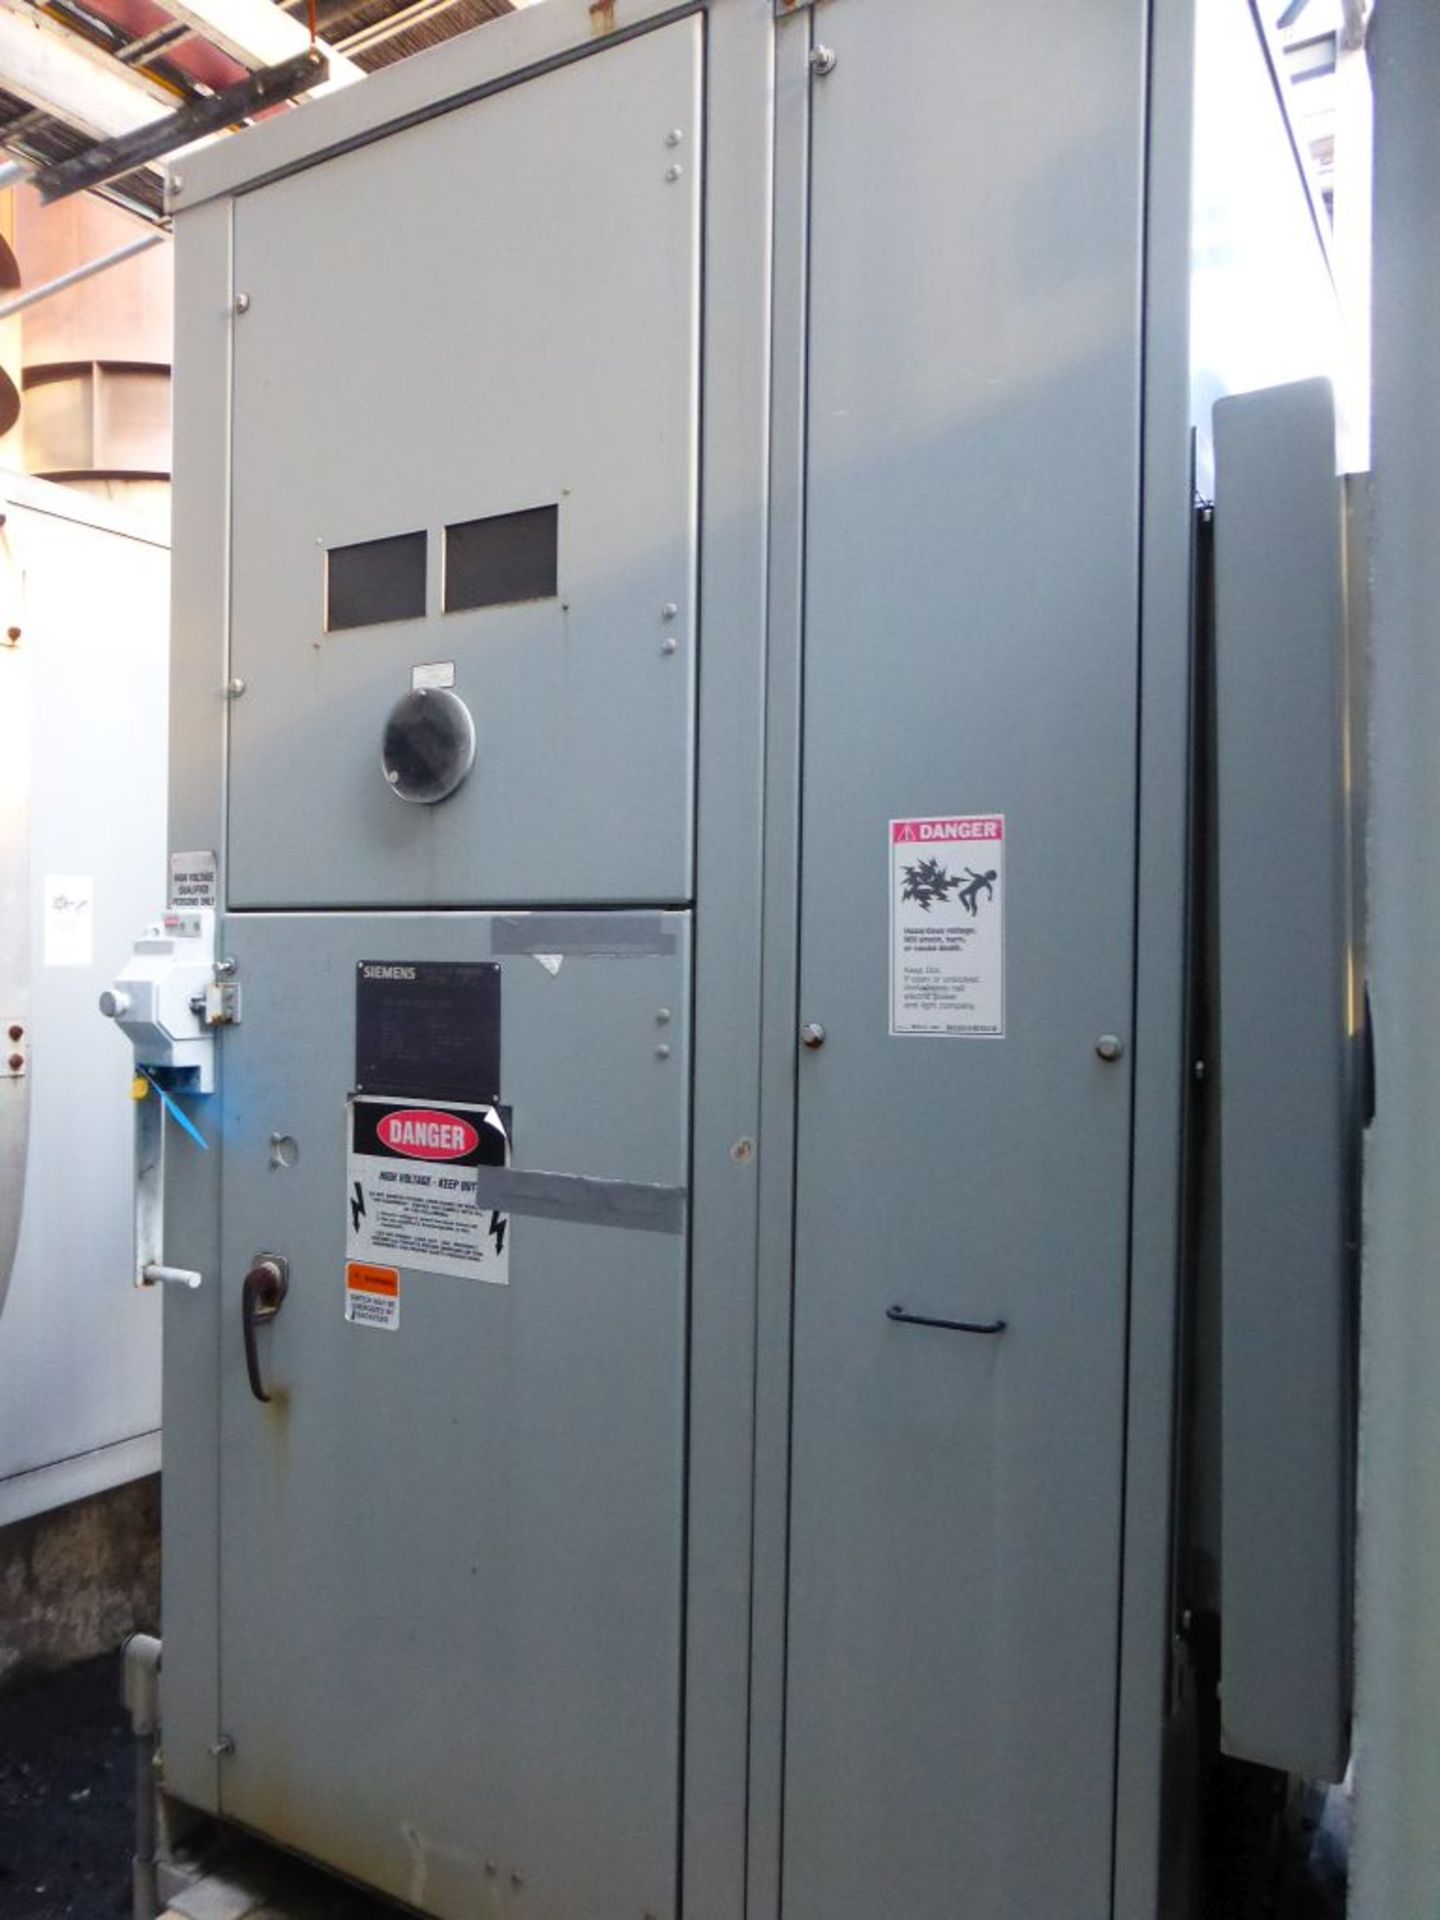 2006 Siemens Transformer w/Siemens Switch - Removed from Service January 2022 | Transformer: 2500/ - Image 4 of 11